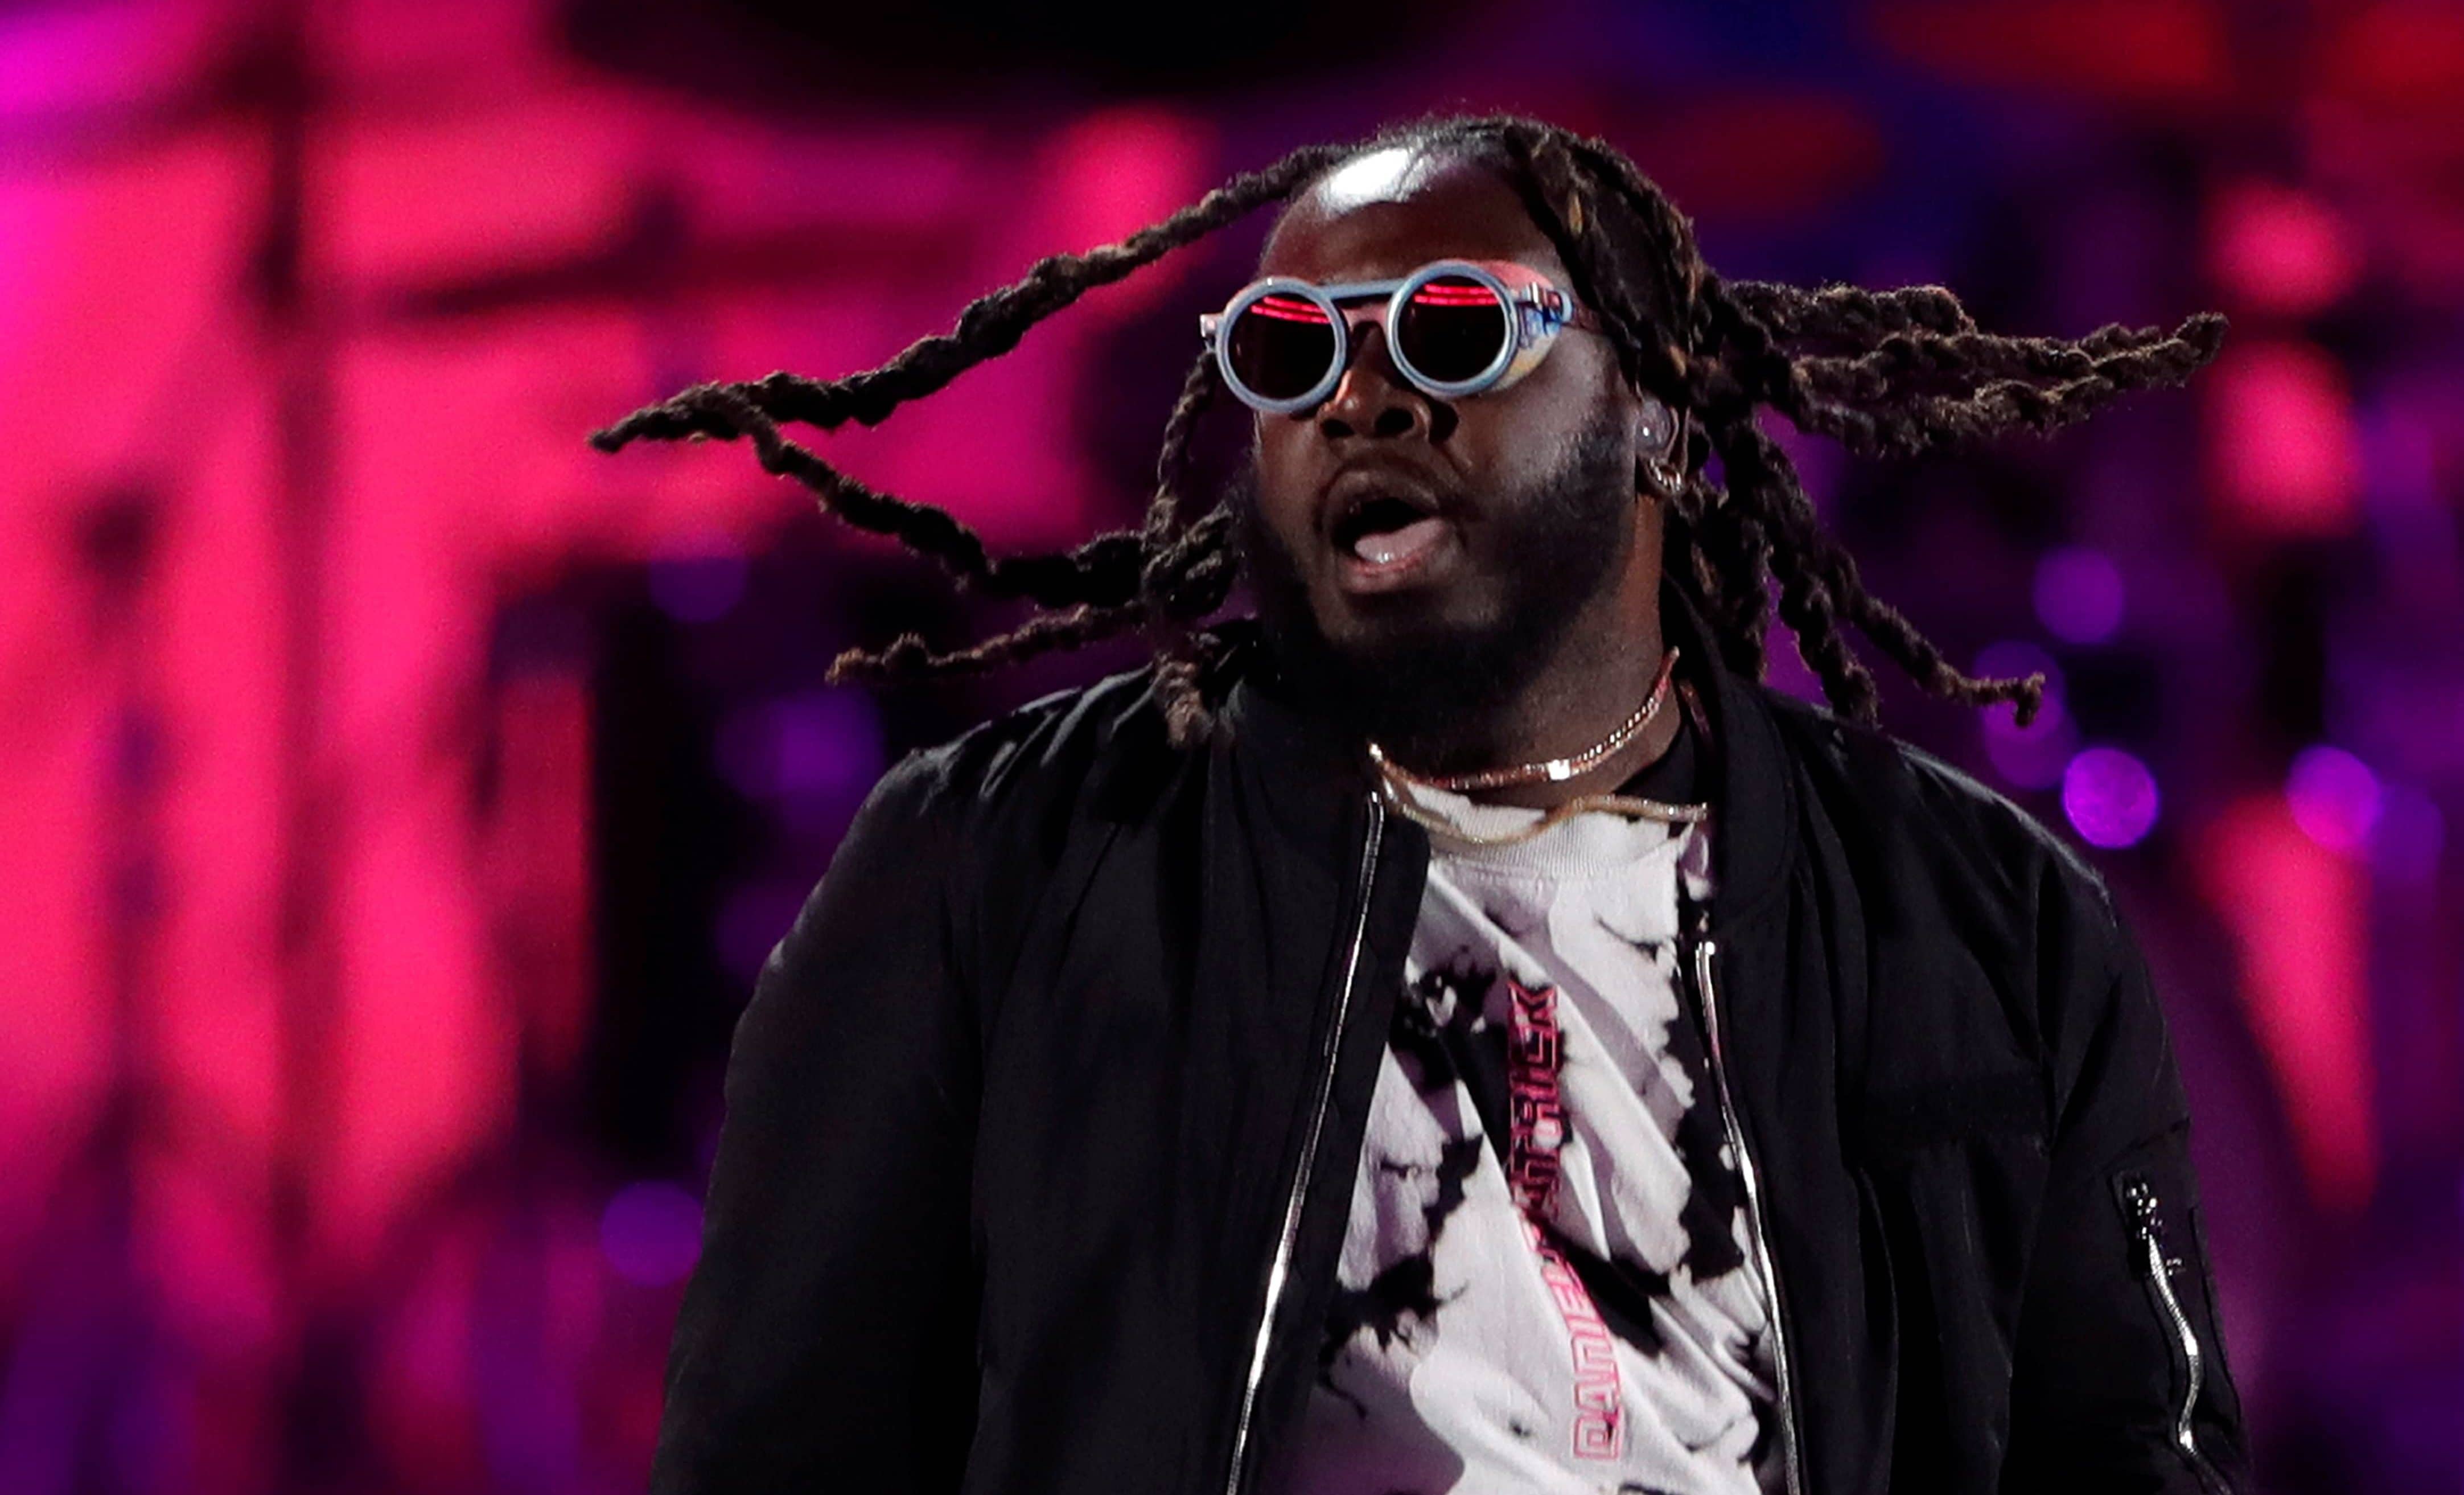 rapper-t-pain-performs-during-the-iheartradio-music-festival-at-t-mobile-arena-in-las-vegas